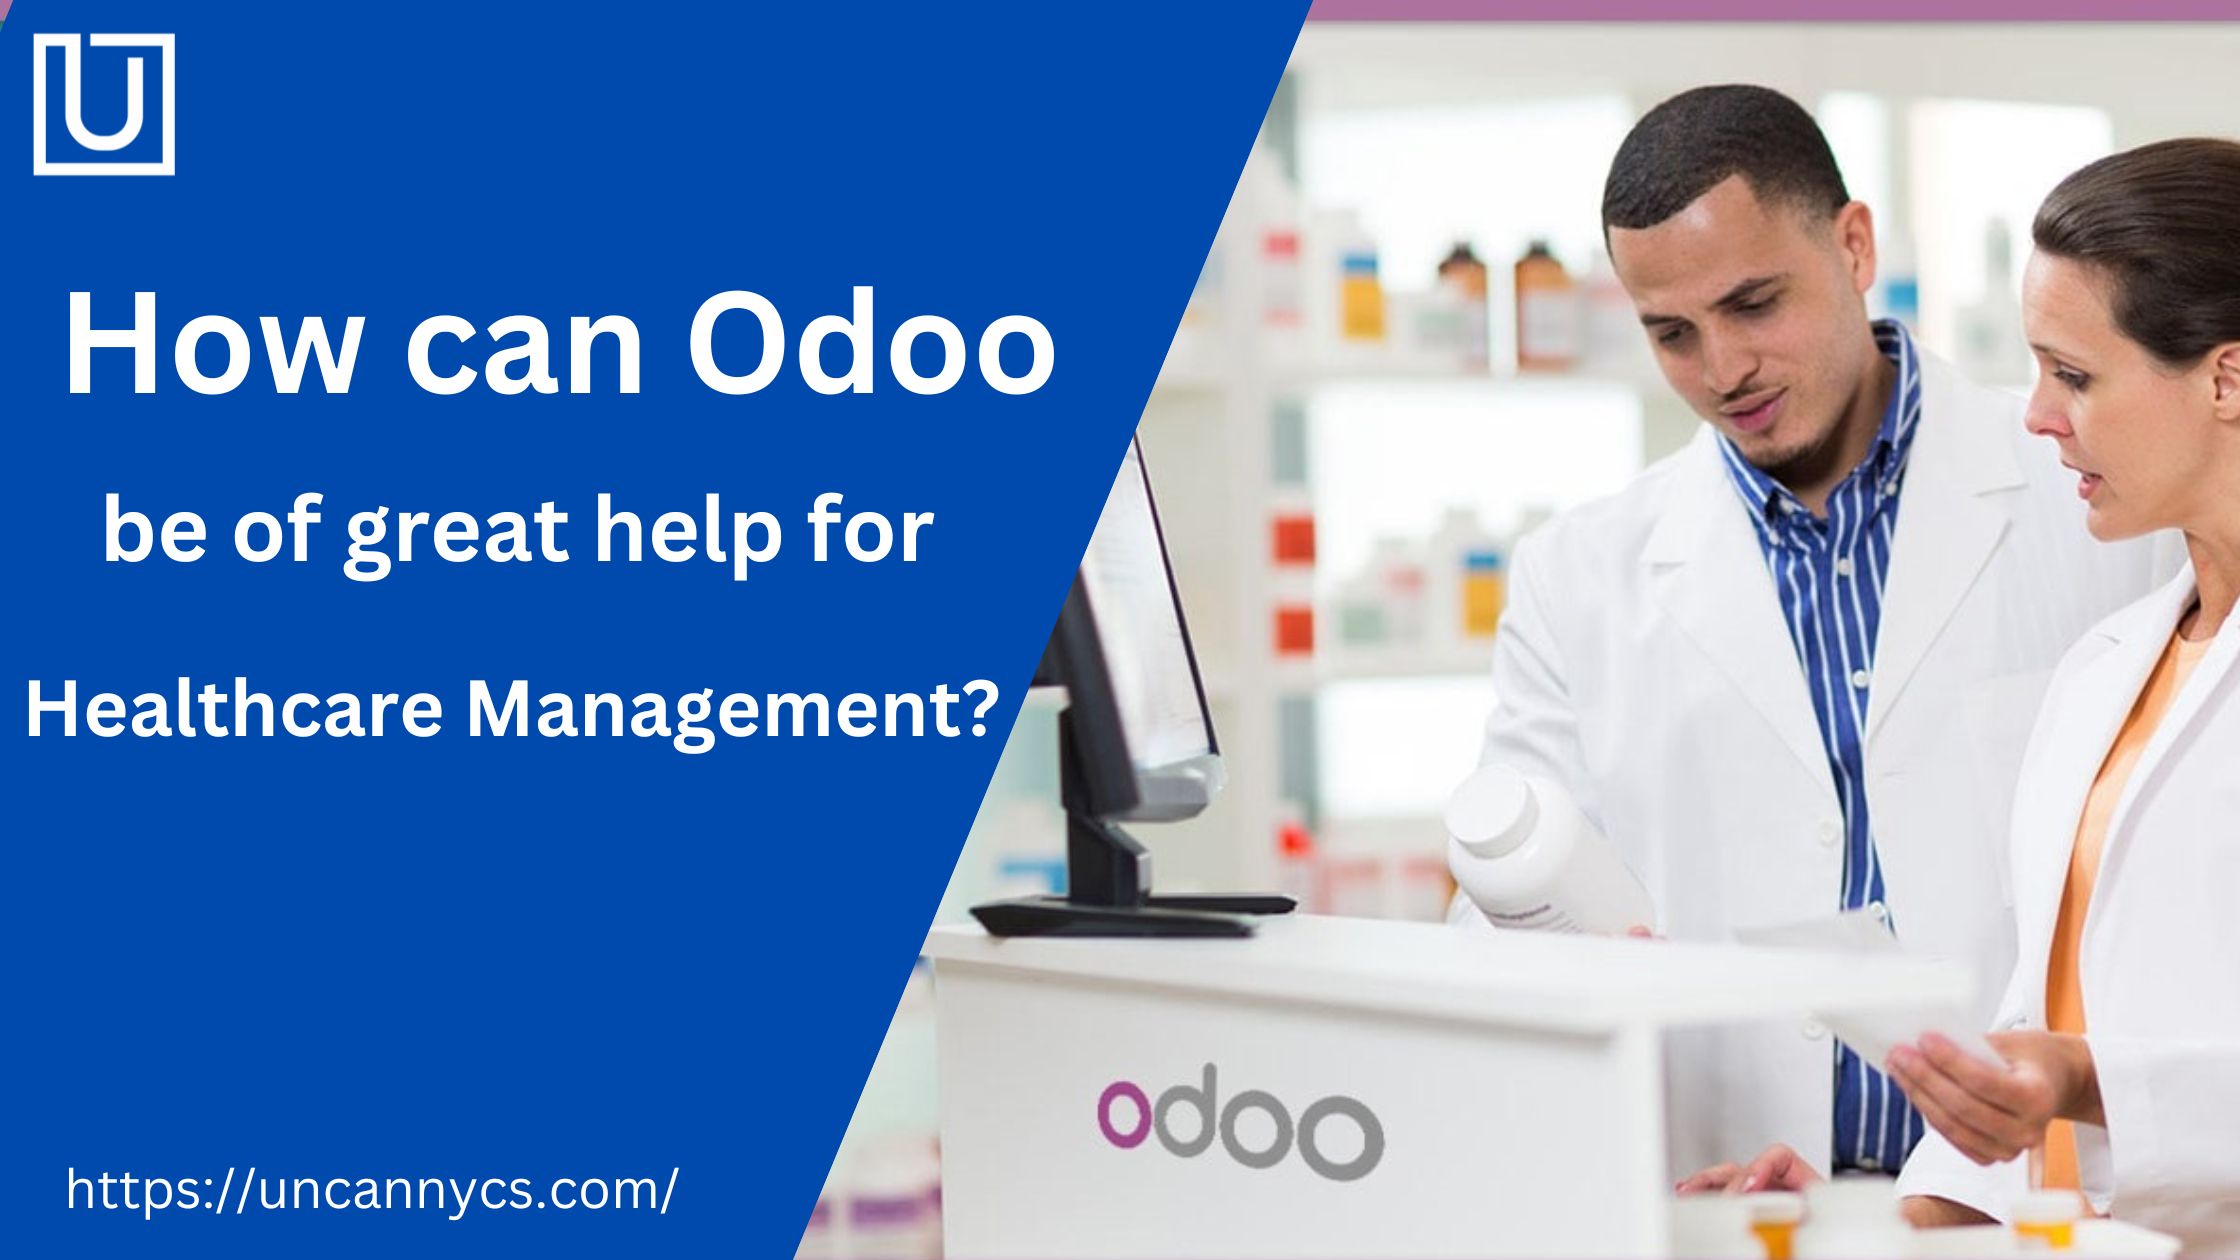 How can Odoo be of great help for Healthcare Management?